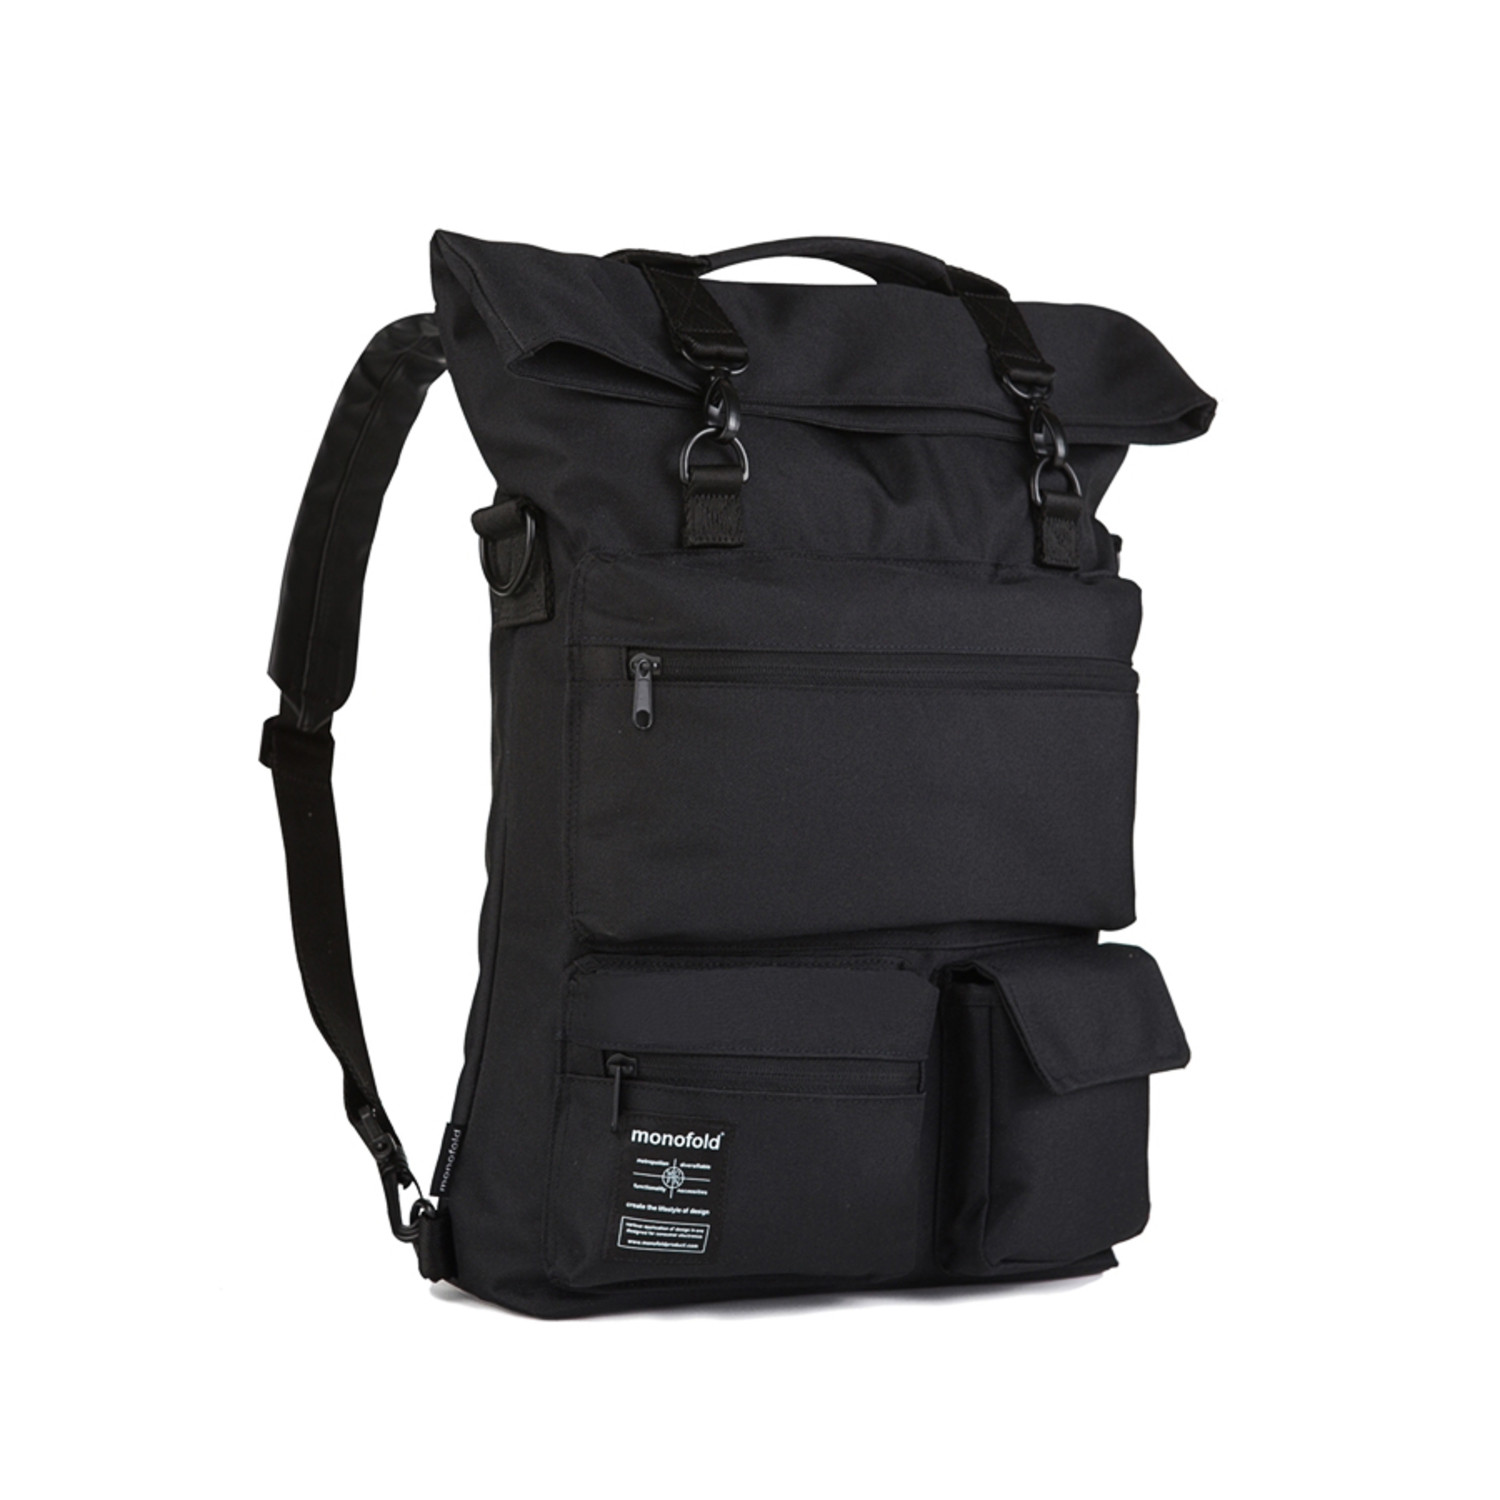 NEO Carry Bag (Black) - Monofold Bags - Touch of Modern